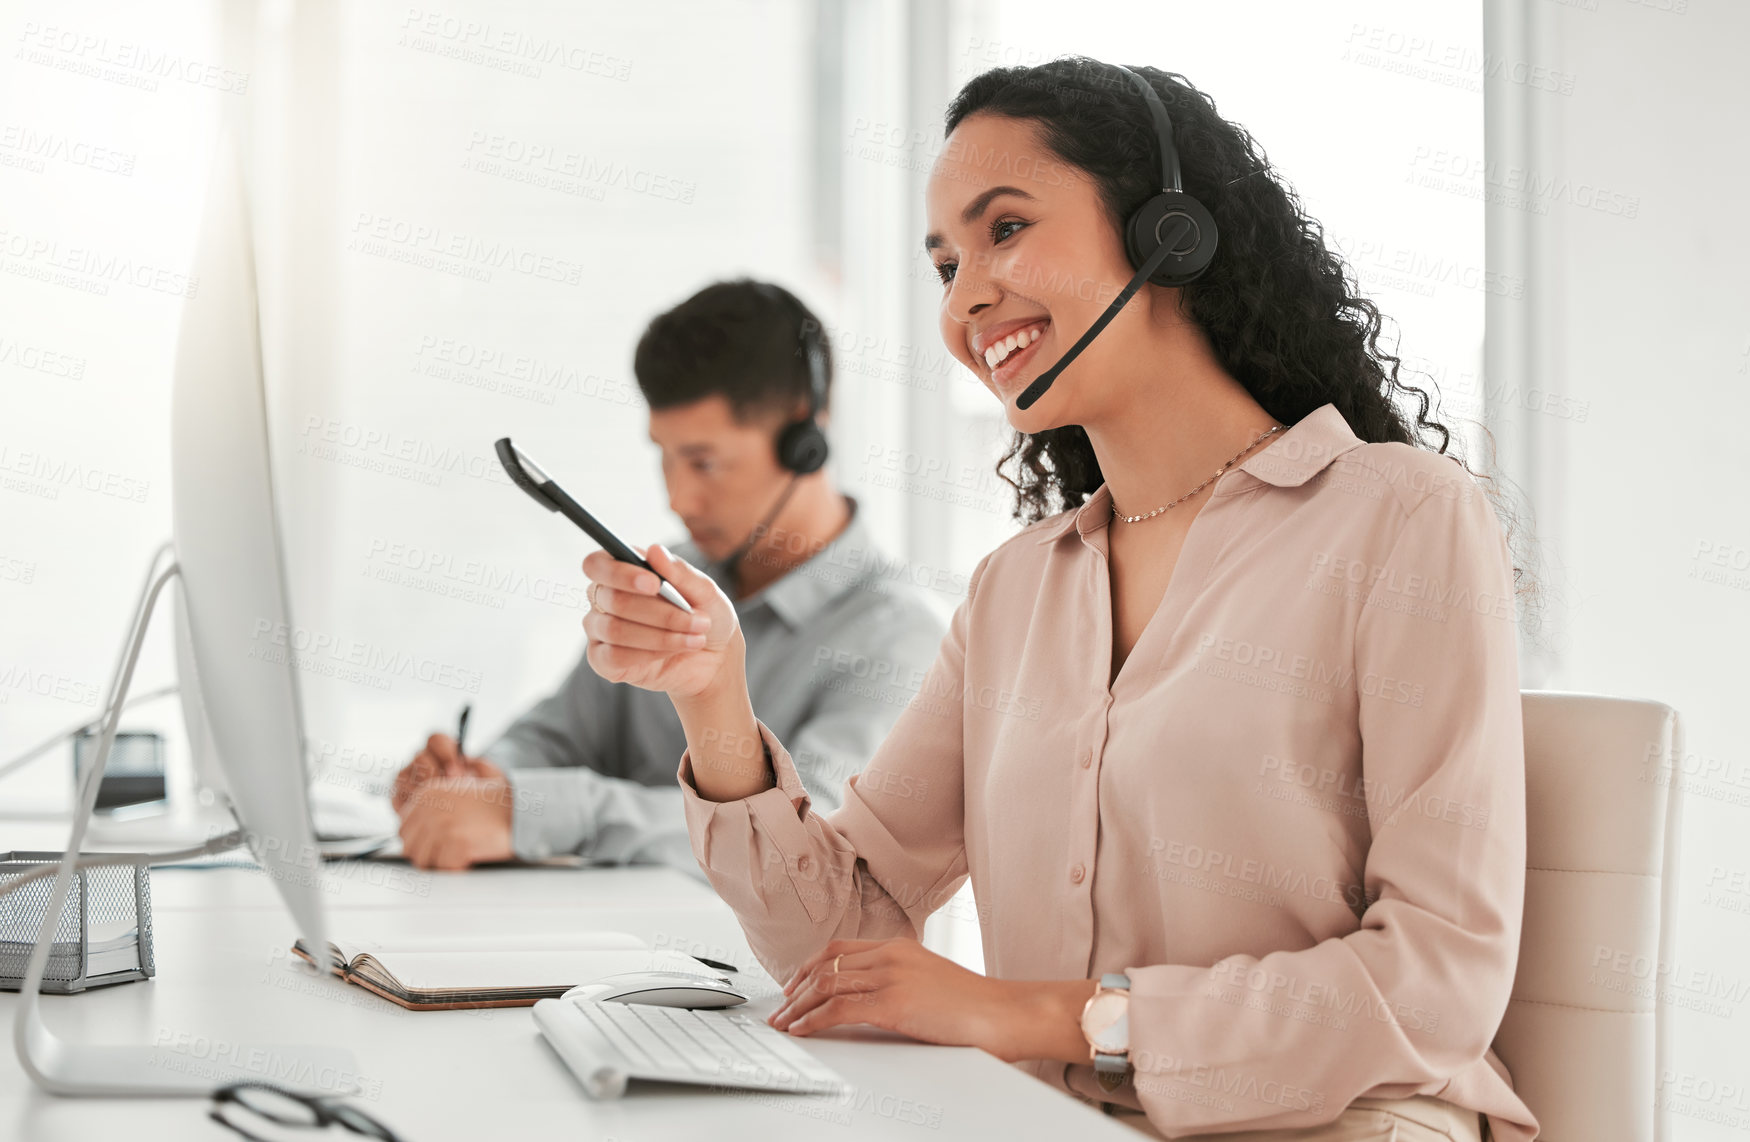 Buy stock photo Call center, computer and woman consultant in office for telemarketing crm online consultation. Communication, customer service and female technical support advisor working on desktop in workplace.